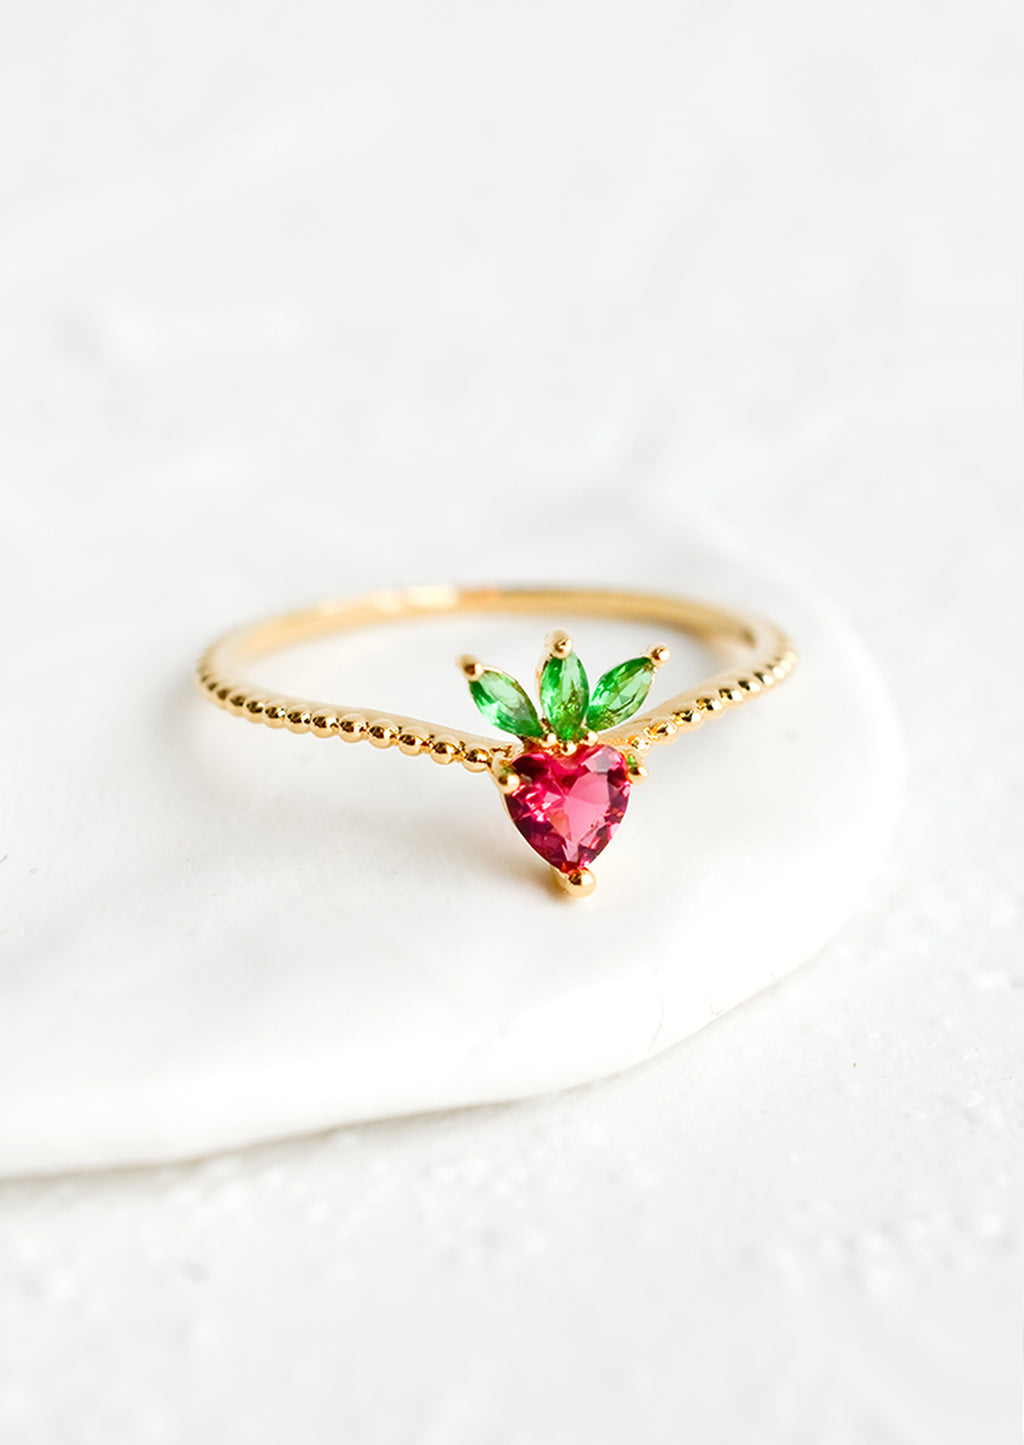 Strawberry / Size 5: A gold ring with beaded texture and strawberry shaped crystal front.